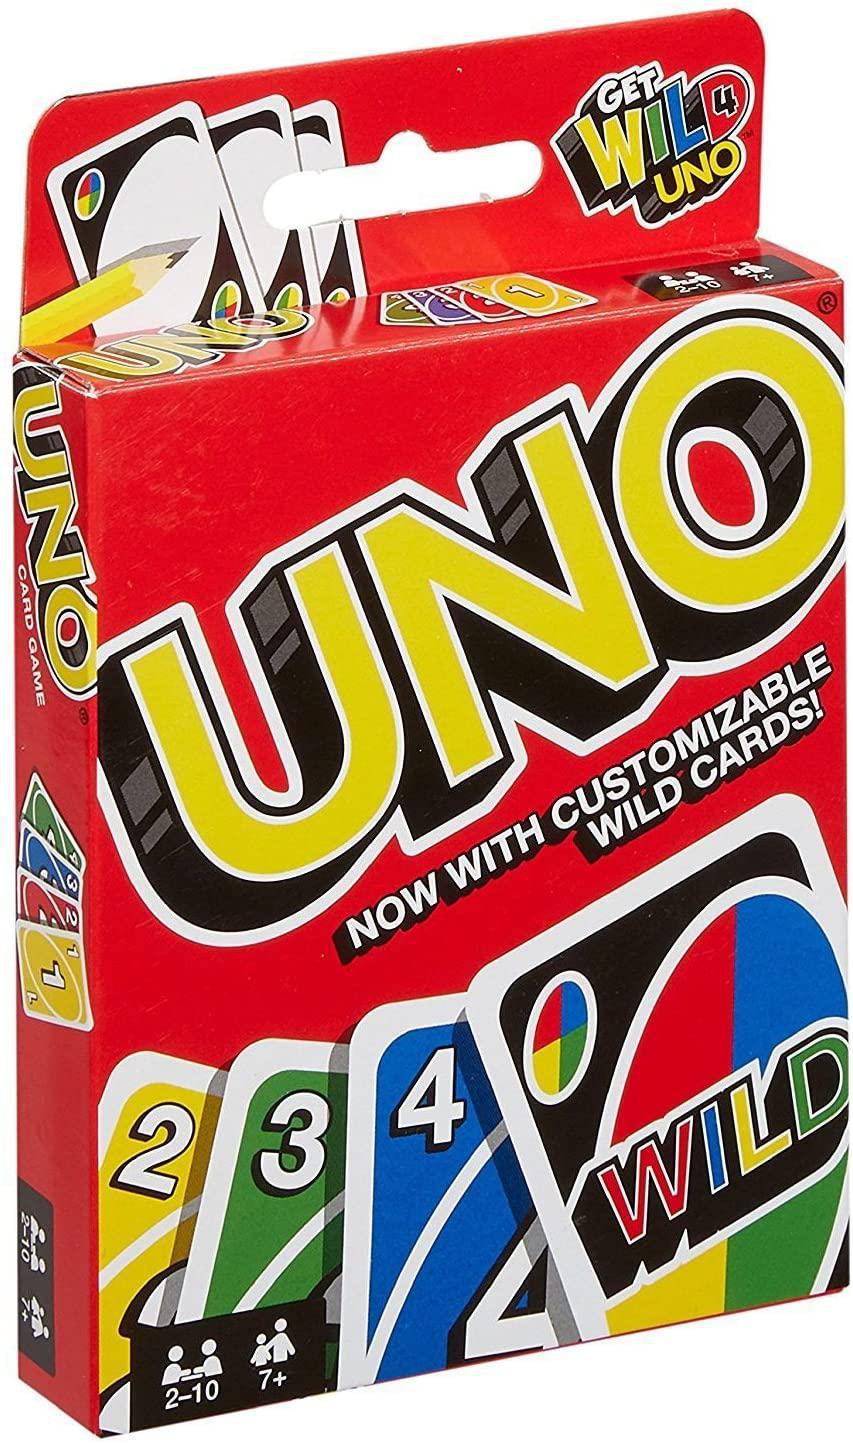  Mattel Games UNO: Classic Card Game, Multi, 8 x 3-3/4 x 81/100  in (42003),7 years and up : Toys & Games